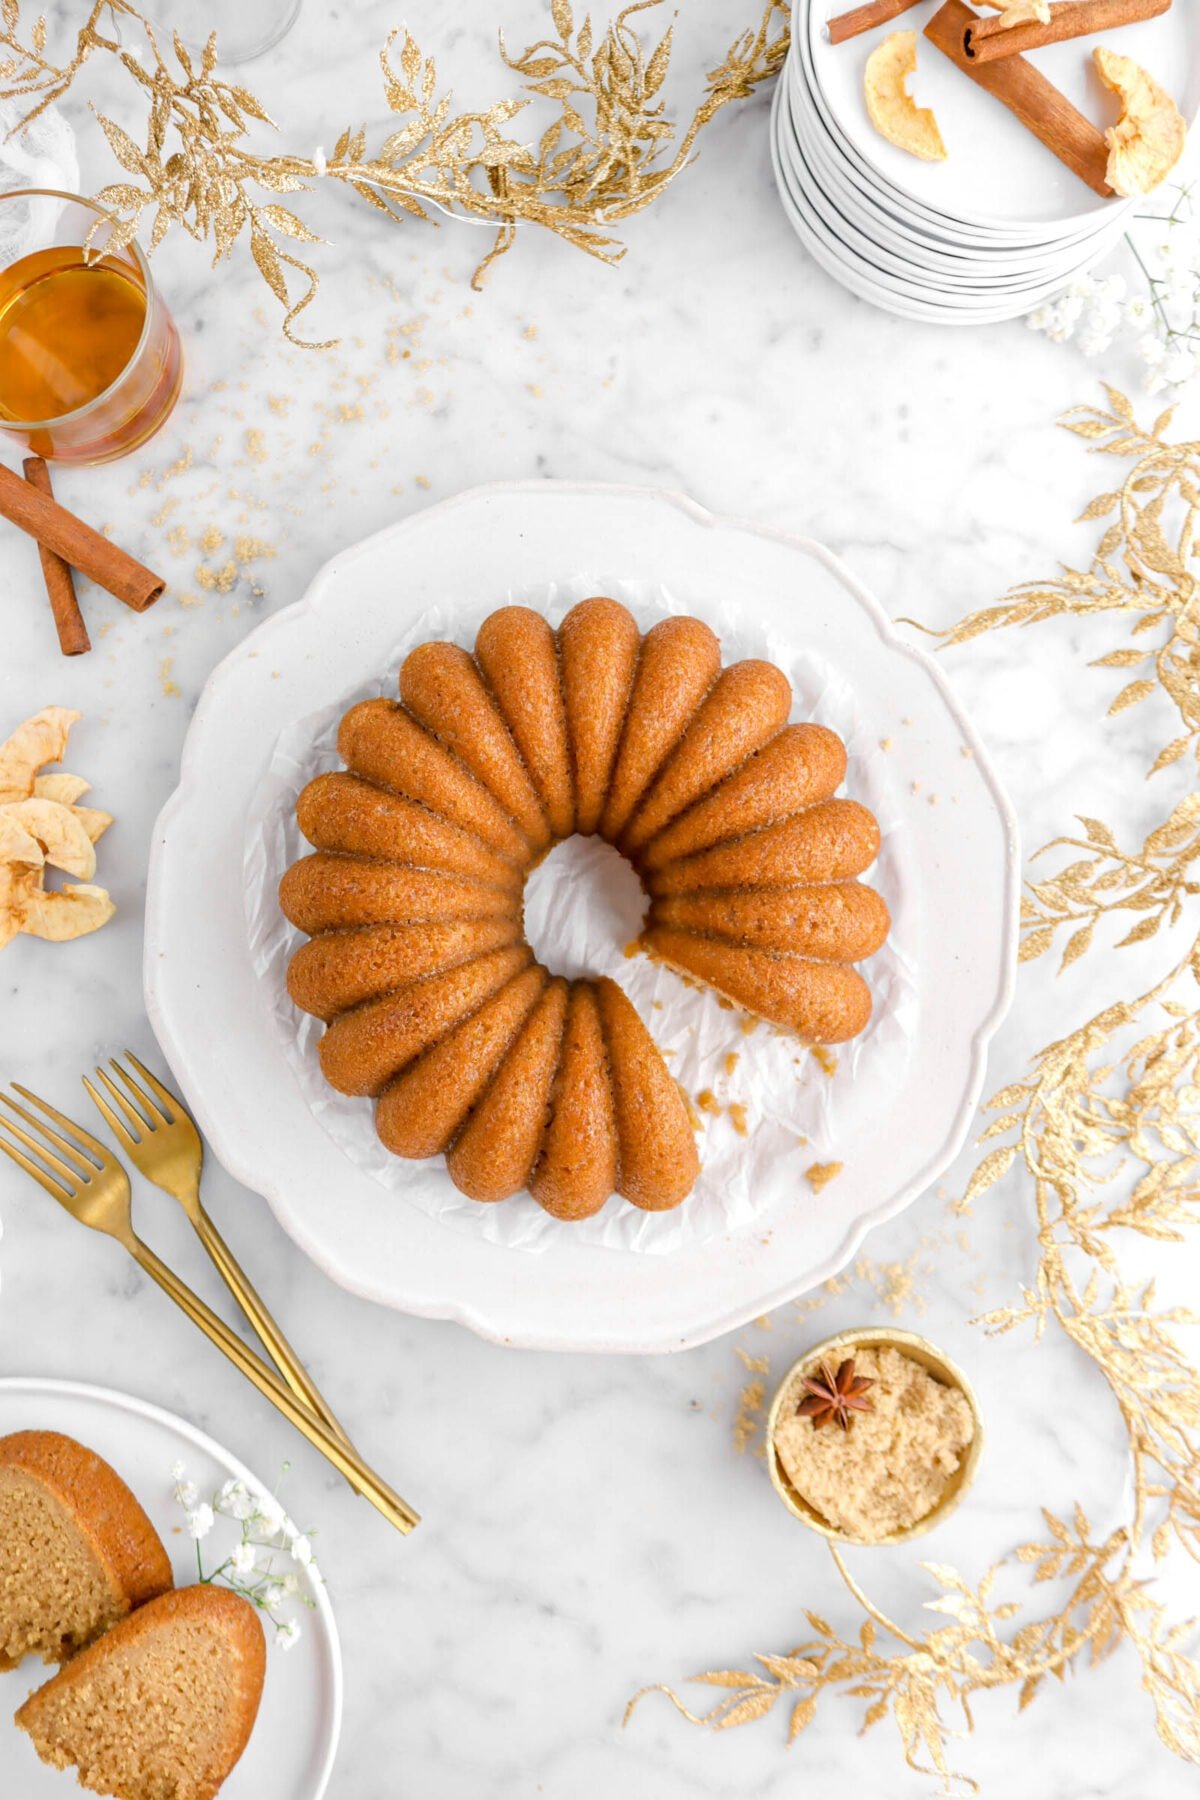 overhead shot of bundt cake with gold leaf garland around, two slices on white plate with white flowers, gold bowl of brown sugar and two forks beside on marble surface